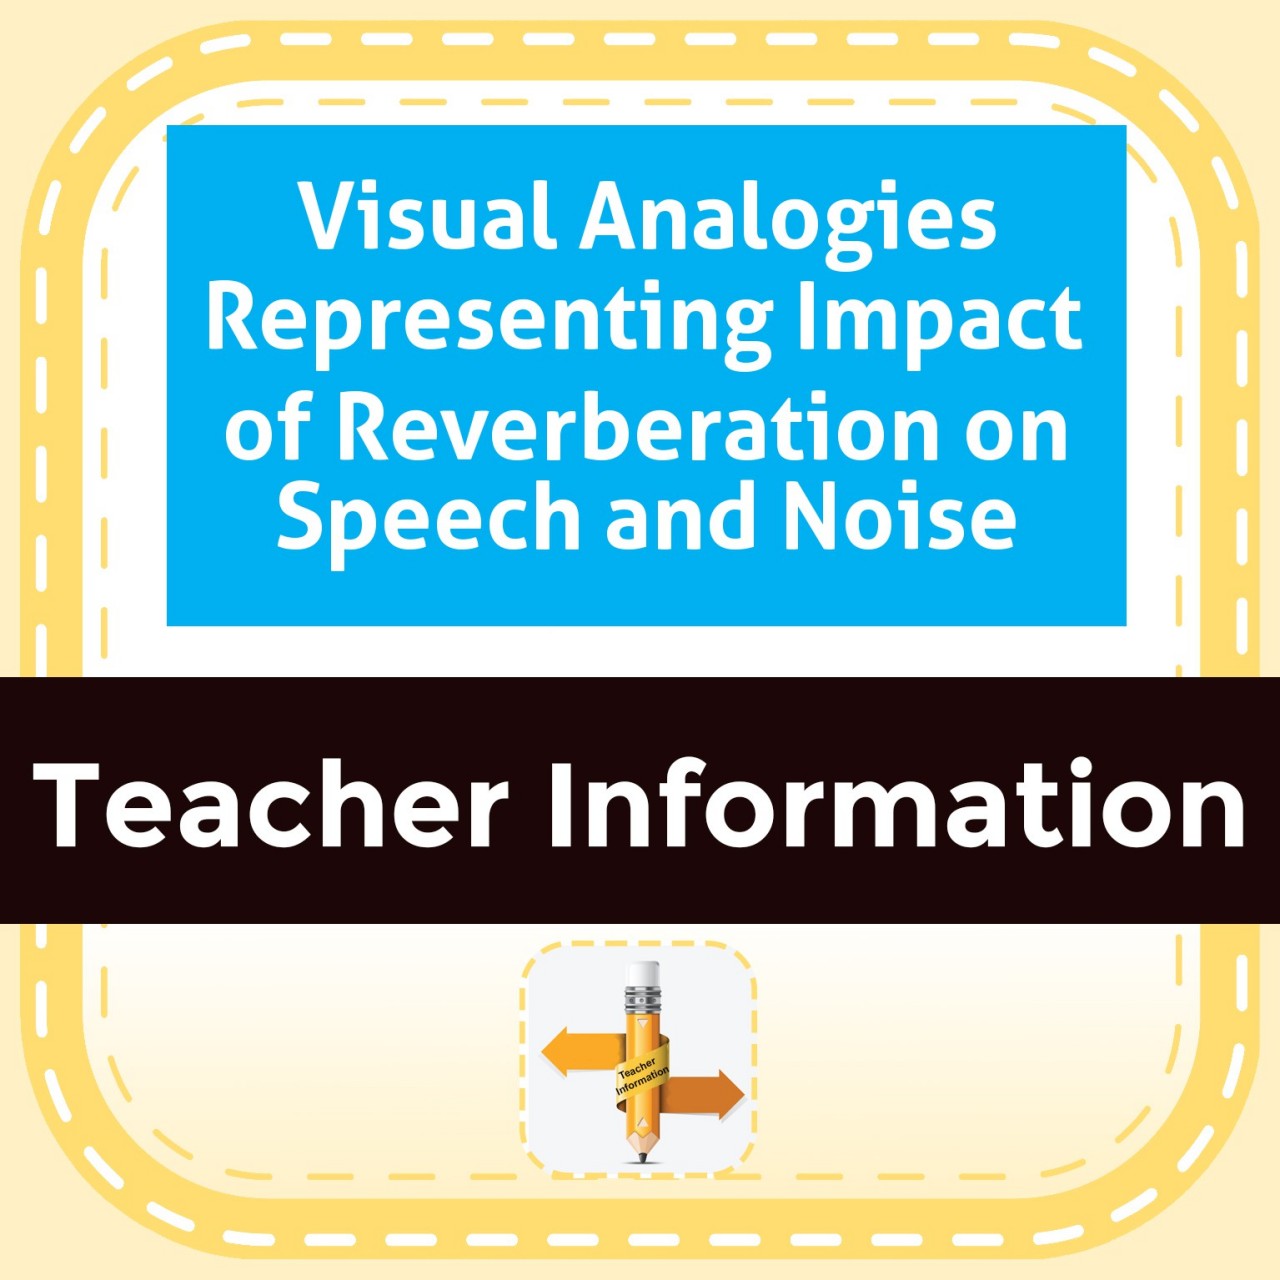 Visual Analogies Representing Impact of Reverberation on Speech and Noise